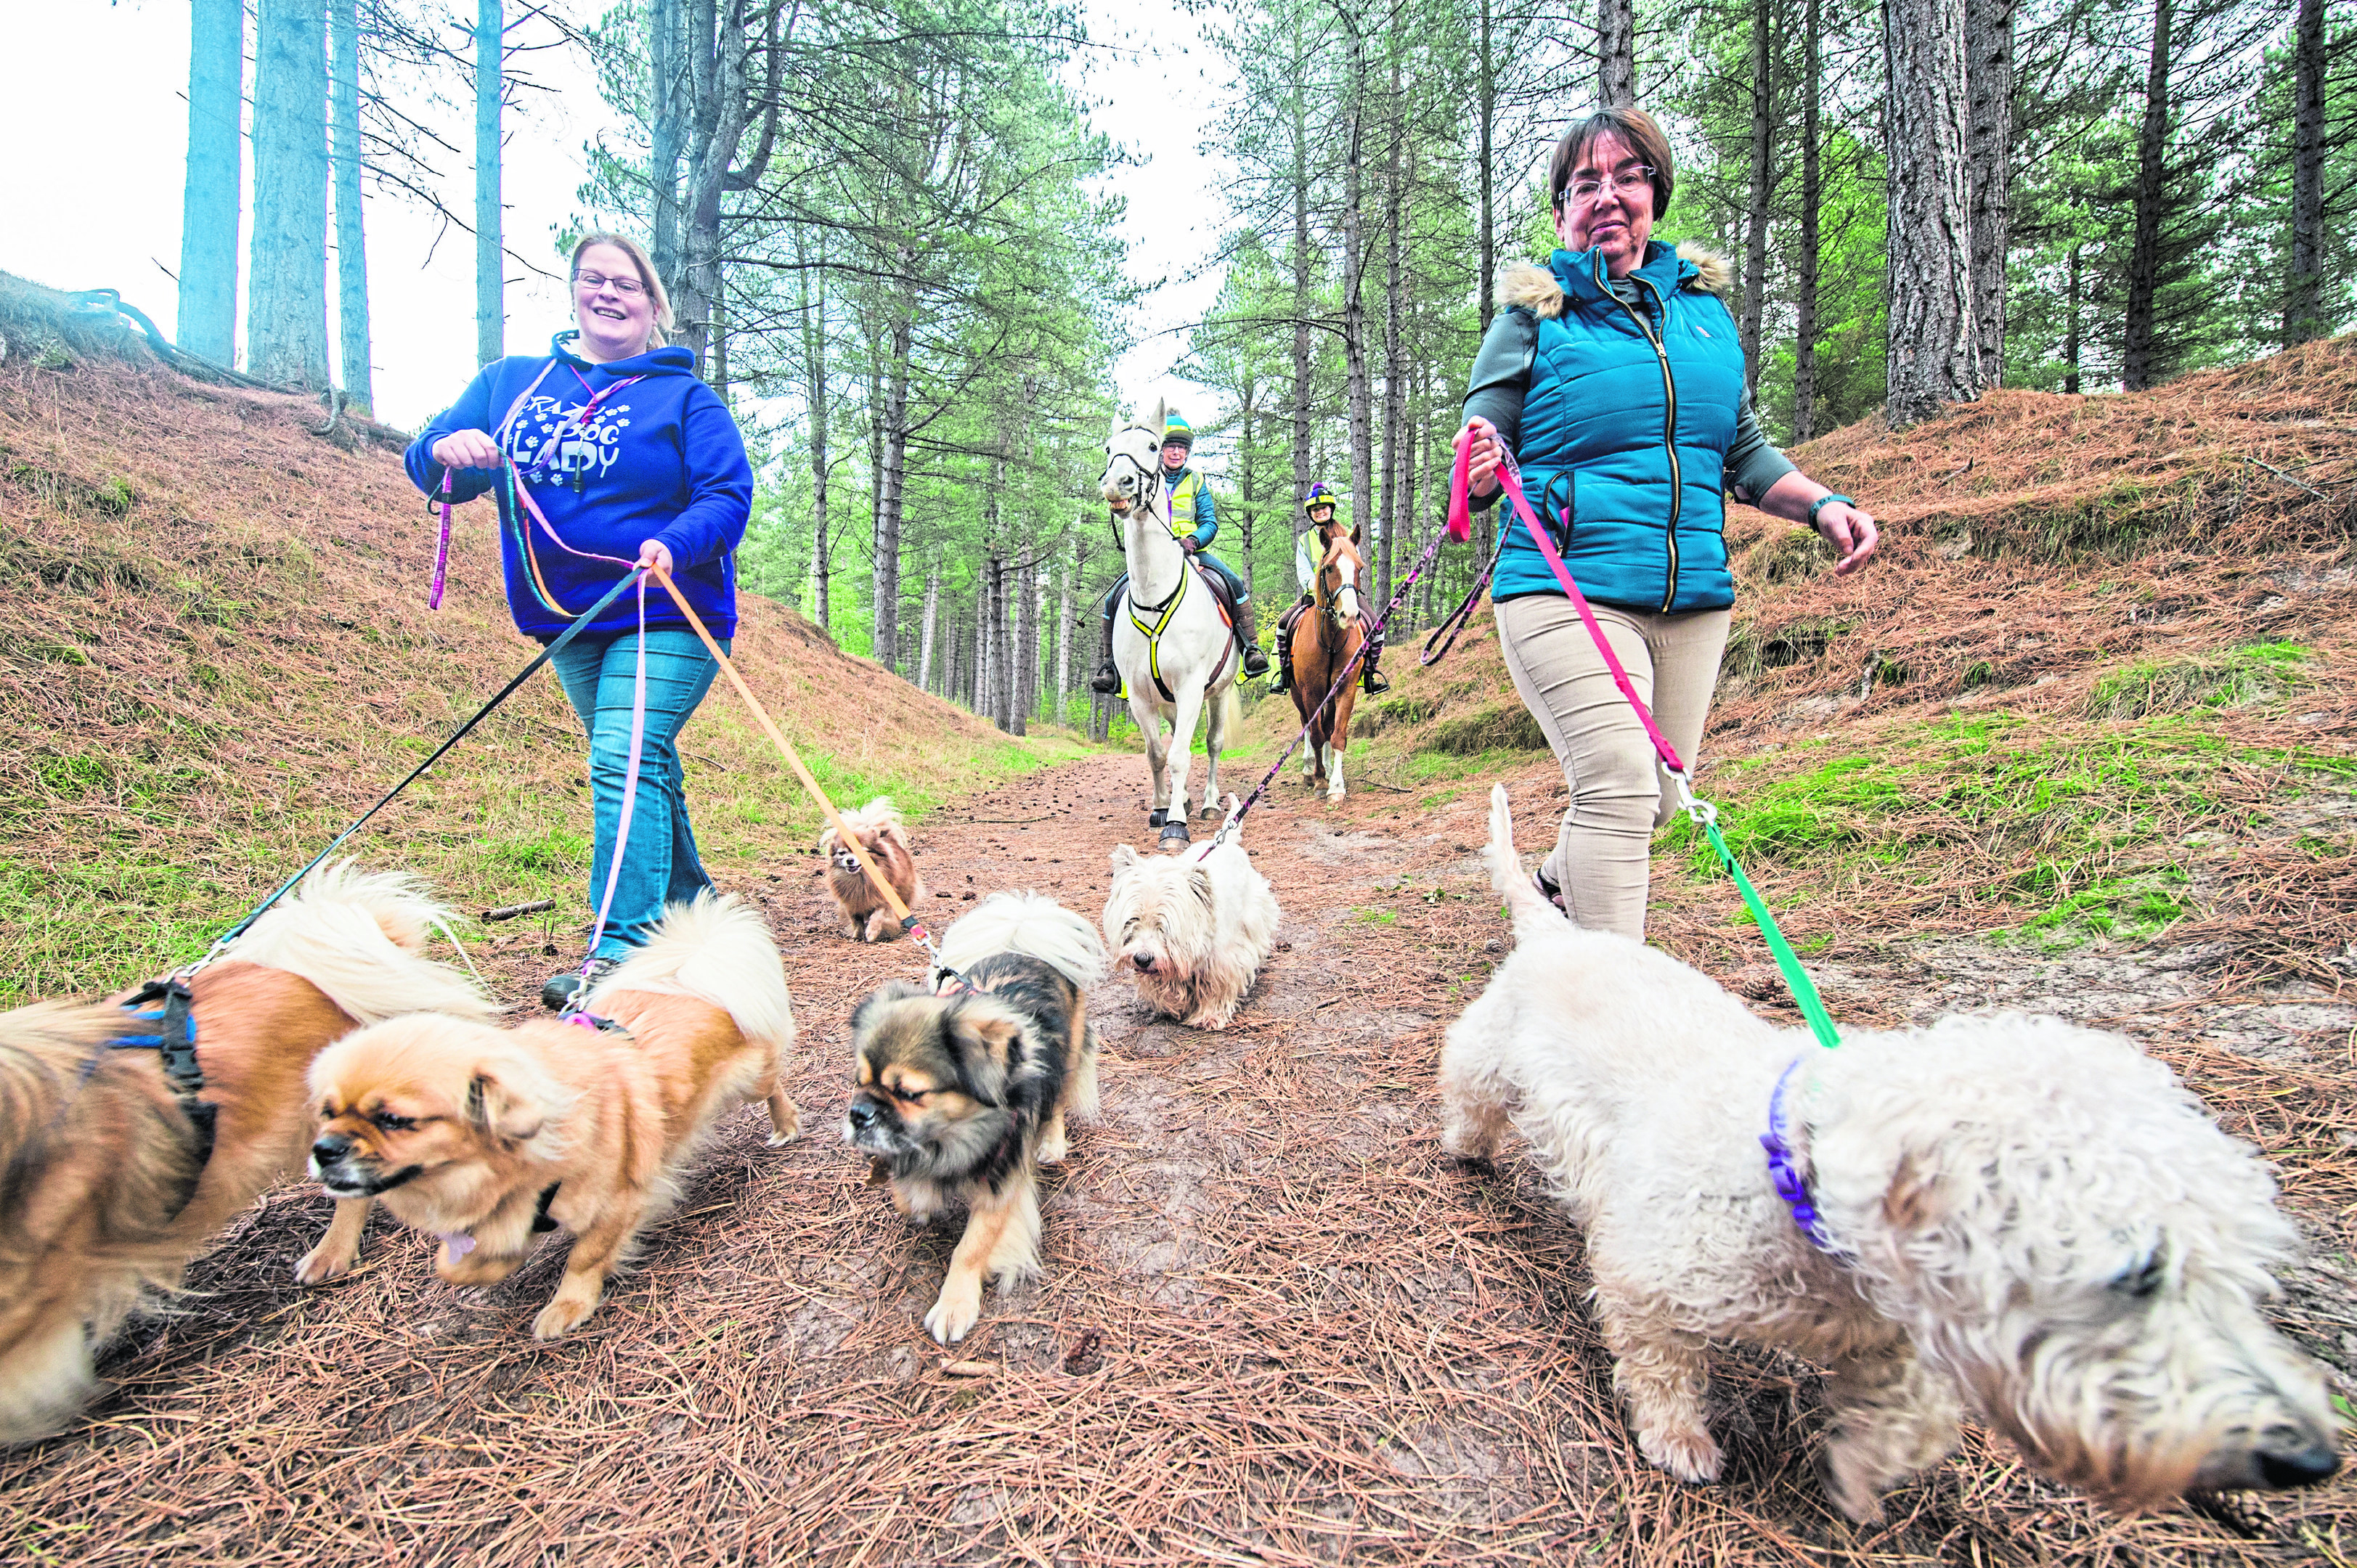 Forest Enterprise Scotland (FES), Police Scotland, the British Horse Society and the Kennel Club are raising awareness of how dogs and horses can safely share forest trails.

Pictured: (l-r) - Gillian Campbell, Elizabeth Anderson, Su Jones and Karen Forbes.

Picture by Jason Hedges.